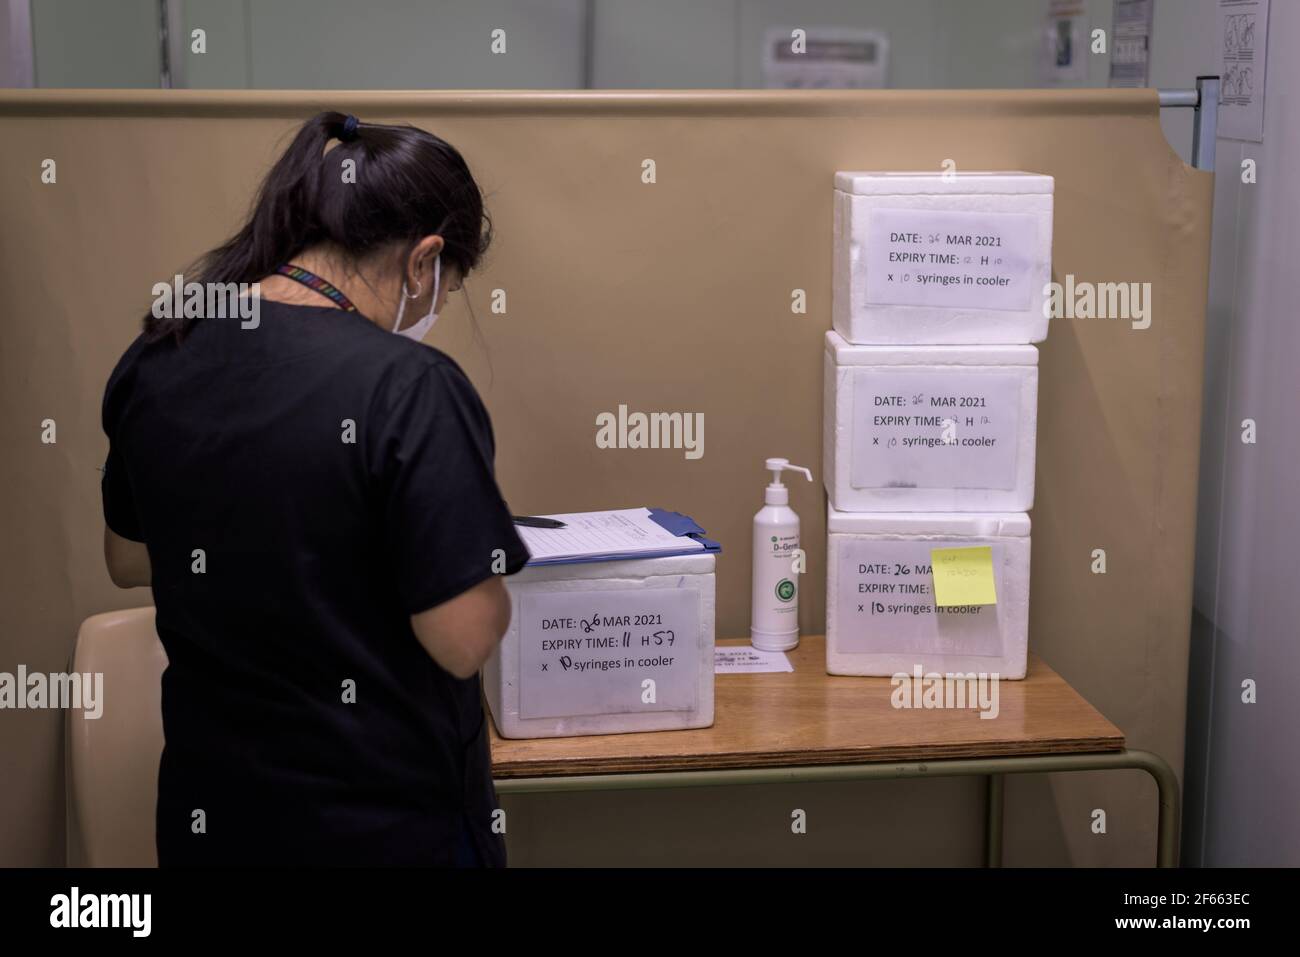 A doctor processes the Johnson & Johnson COVID-19 vaccines at Cape Town's Groote Schuur hospital being given to South African health care workers Stock Photo